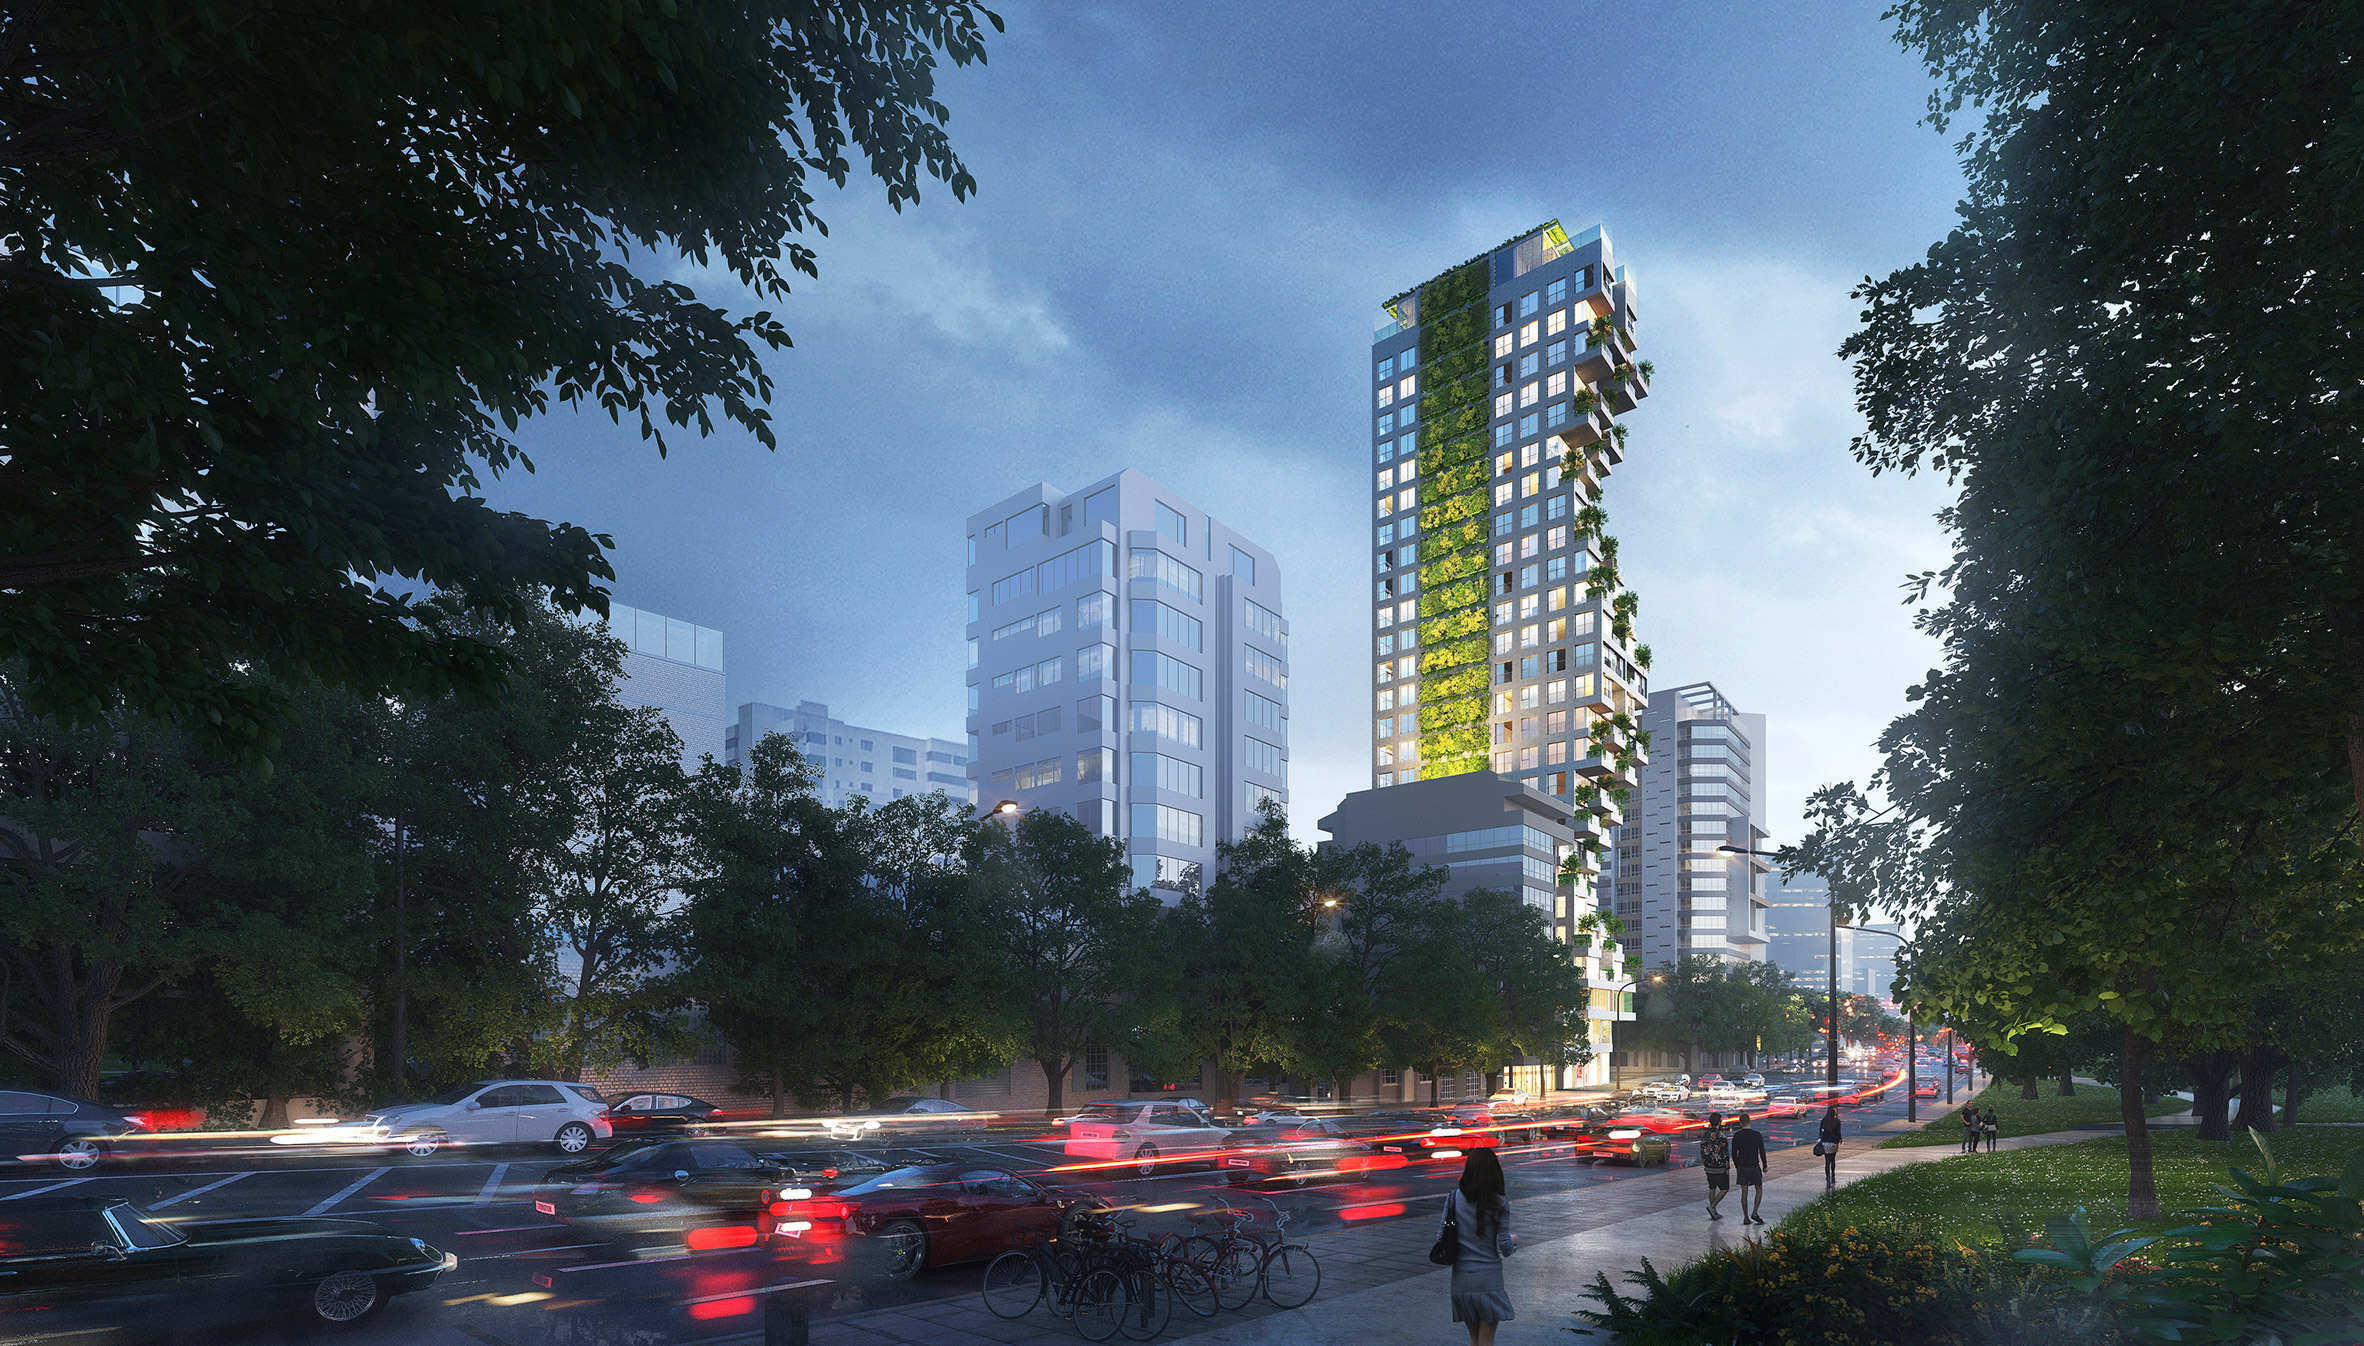 Safdie Architects' Qorner tower for Quito to feature "hillside of terraces"